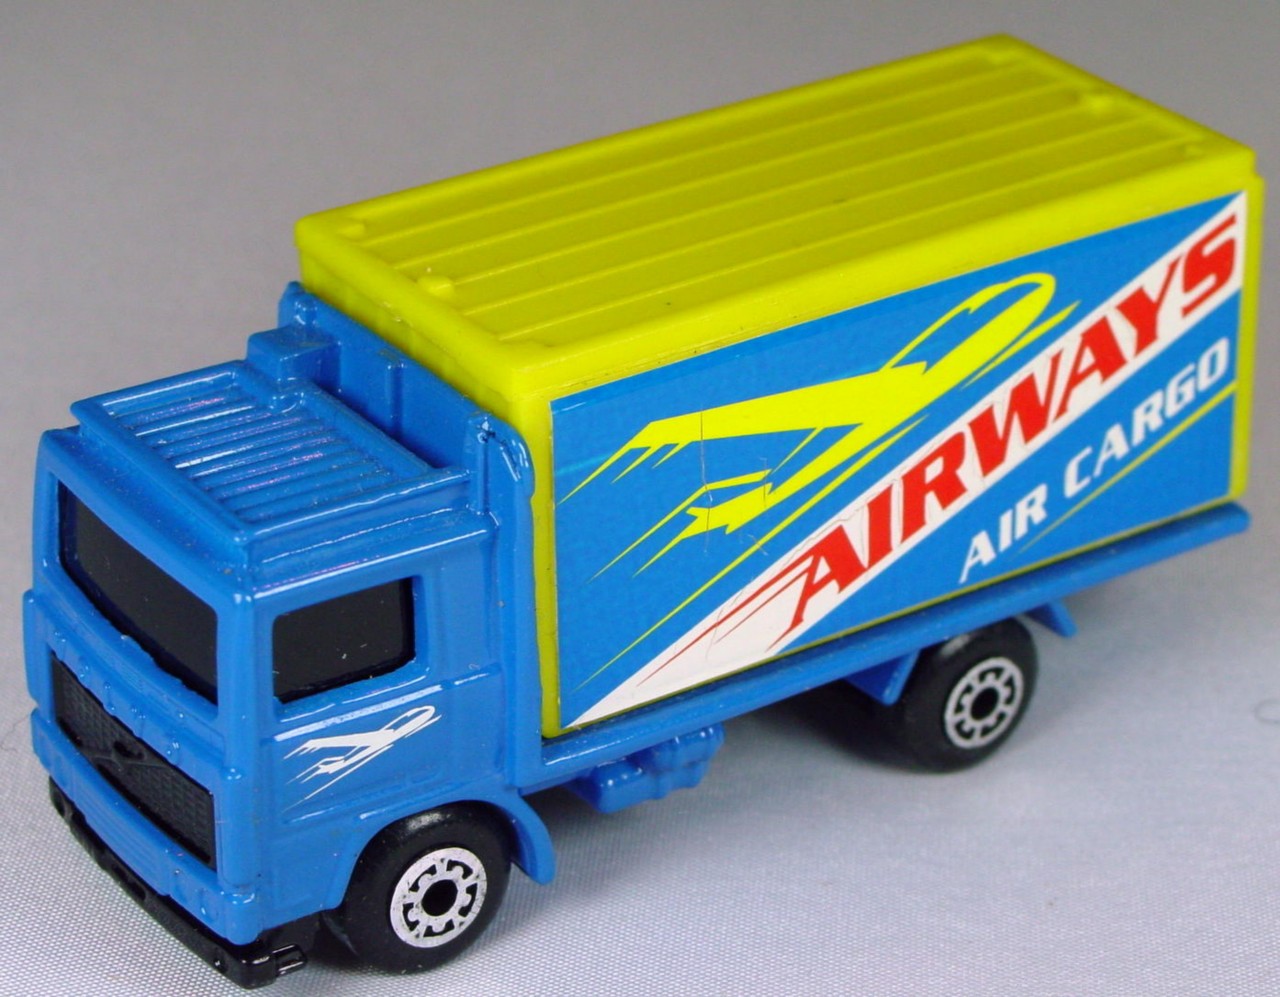 Pre-production 20 D 51 - Volvo Truck Blue and yellow Airways Air Cargo Labs made in China unspread